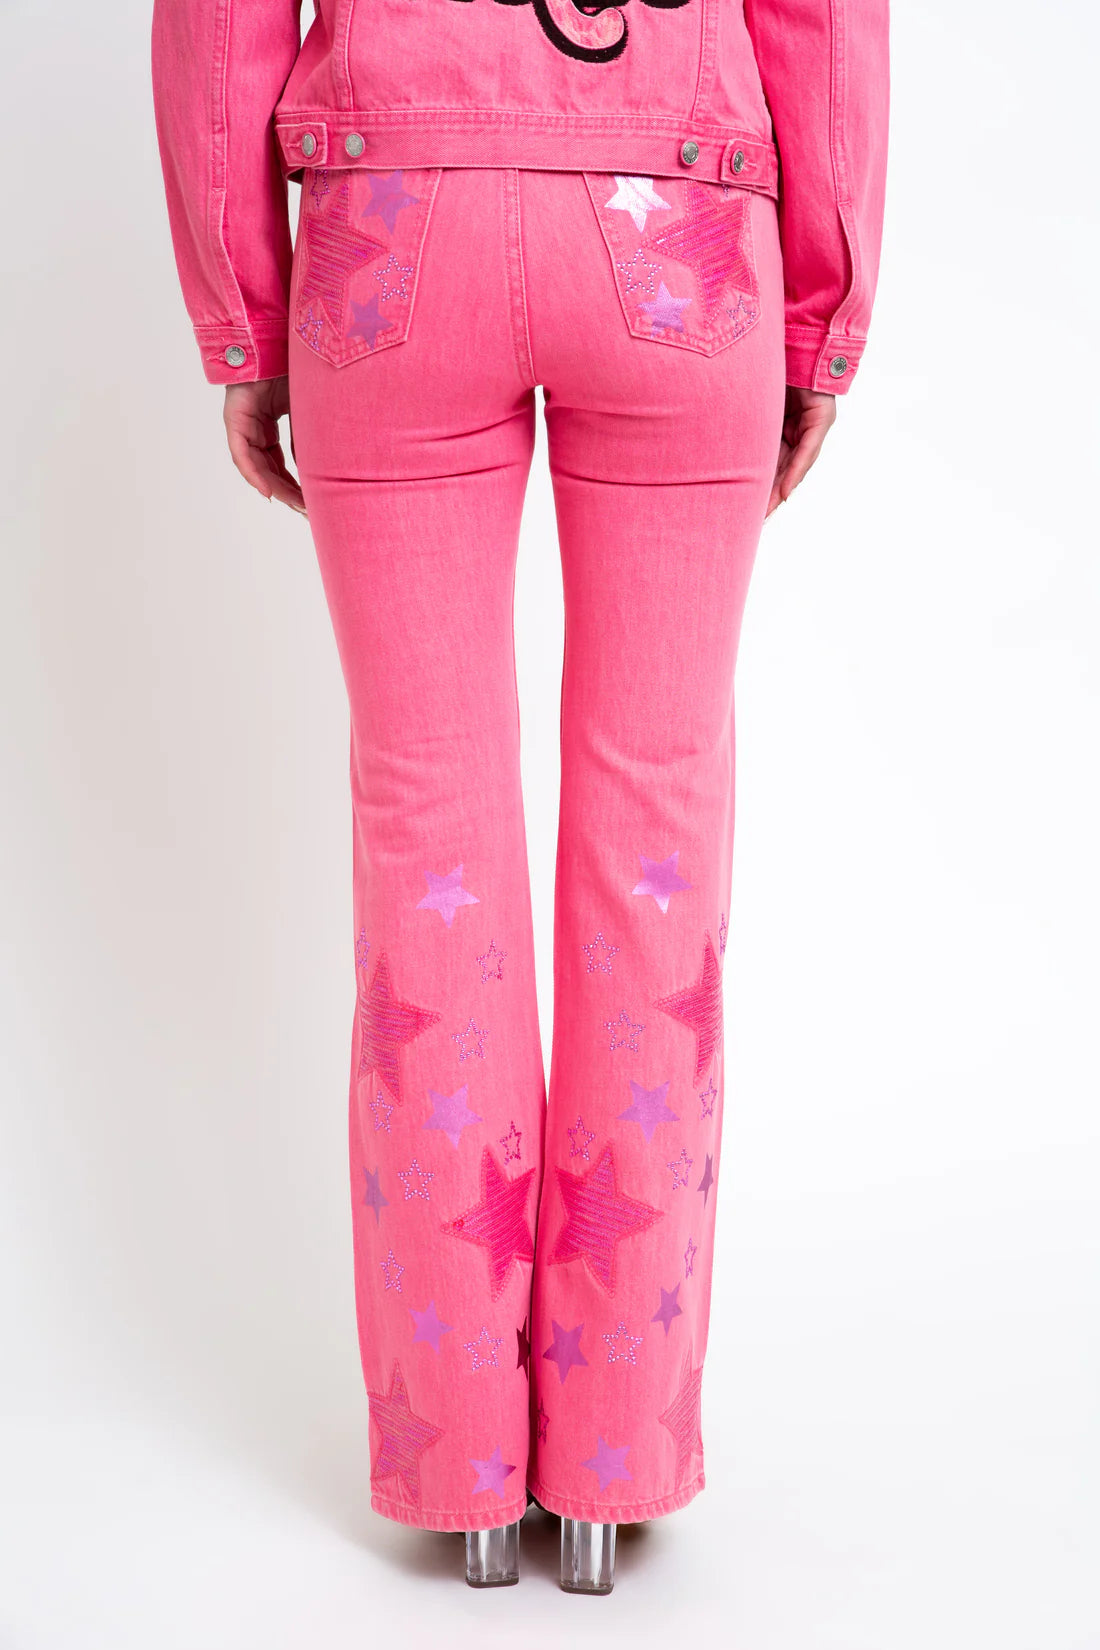 GRACE IN LA “LET'S GO GIRLS” EMBROIDERY PINK DENIM HIGH WAIST FLARE JEANS